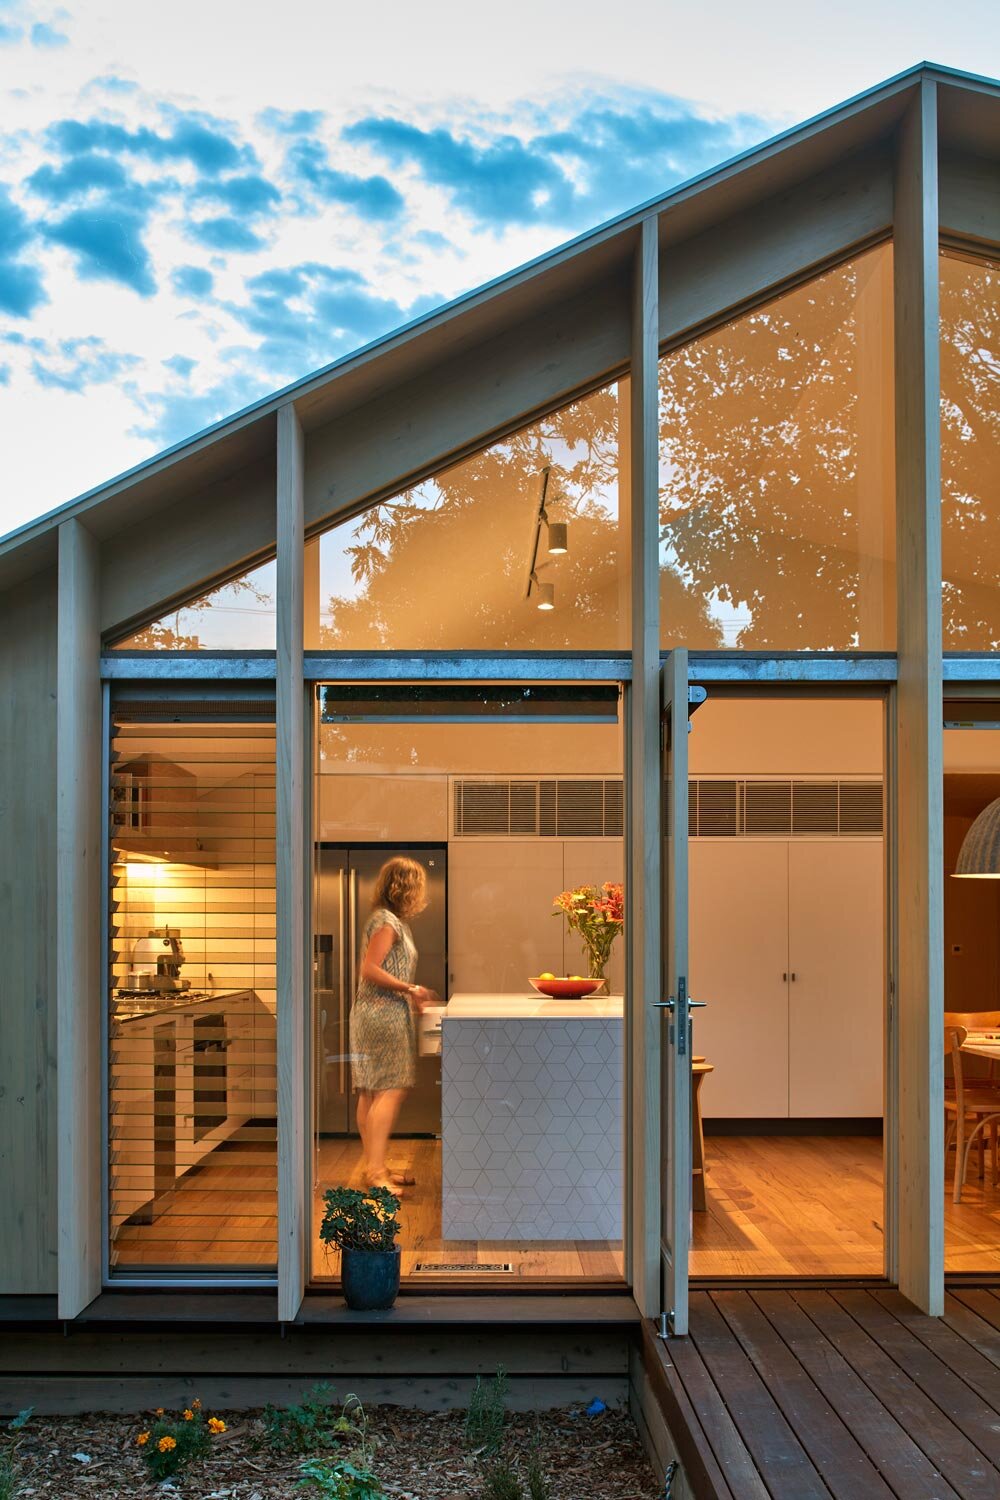 lean-to-house-oakleigh-melbourne-renovation-by-warc-studio-architects-13.jpg